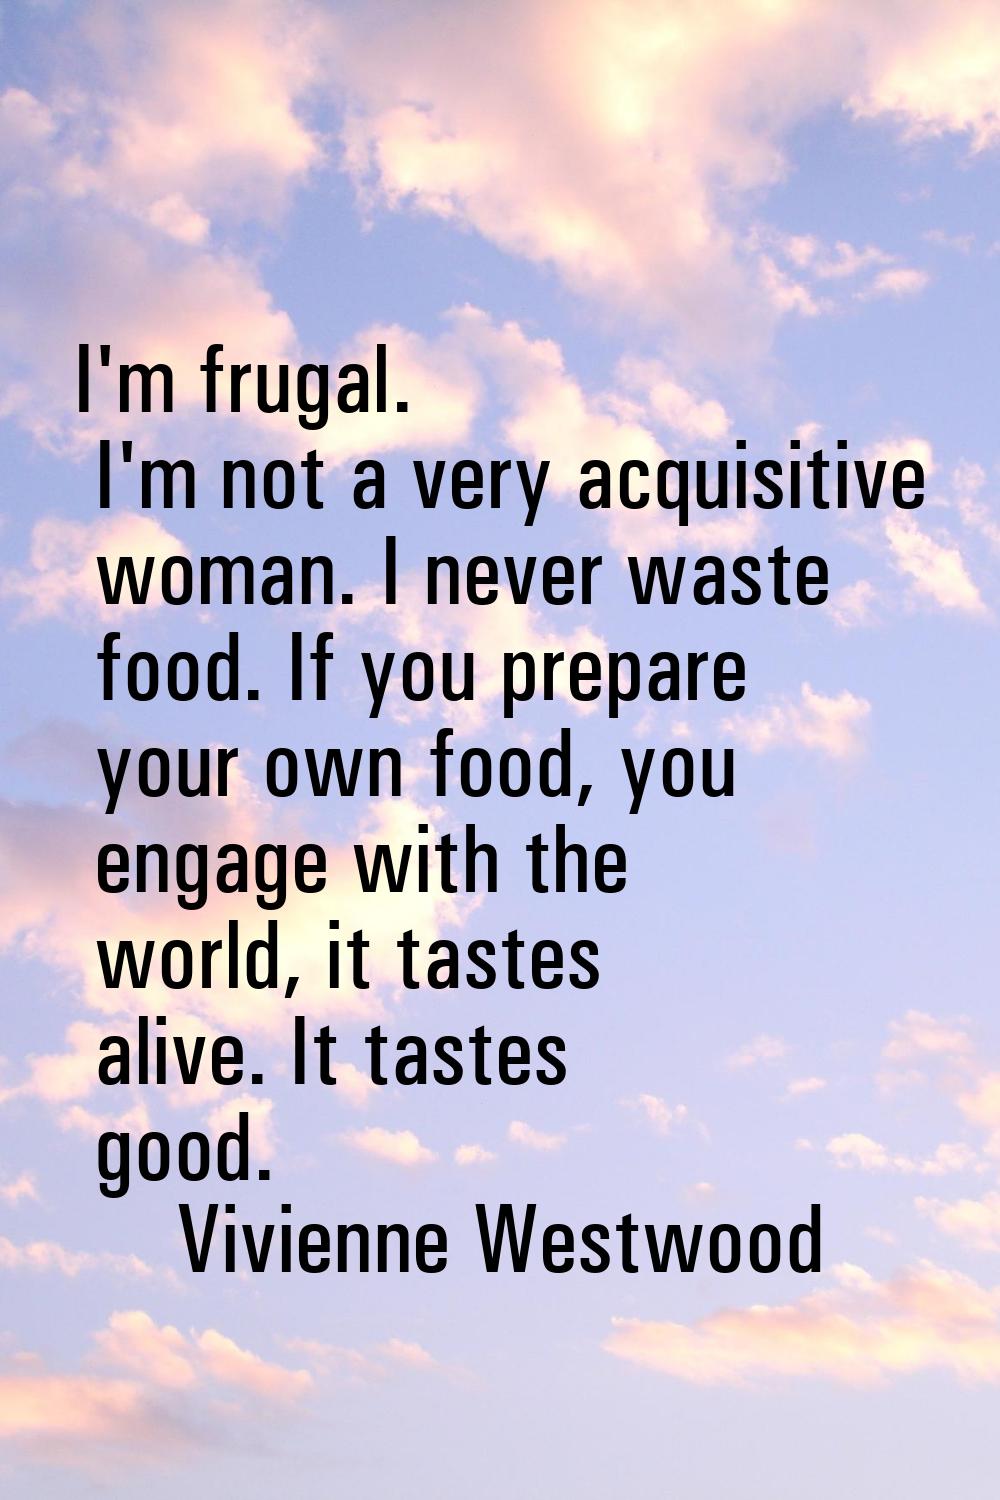 I'm frugal. I'm not a very acquisitive woman. I never waste food. If you prepare your own food, you